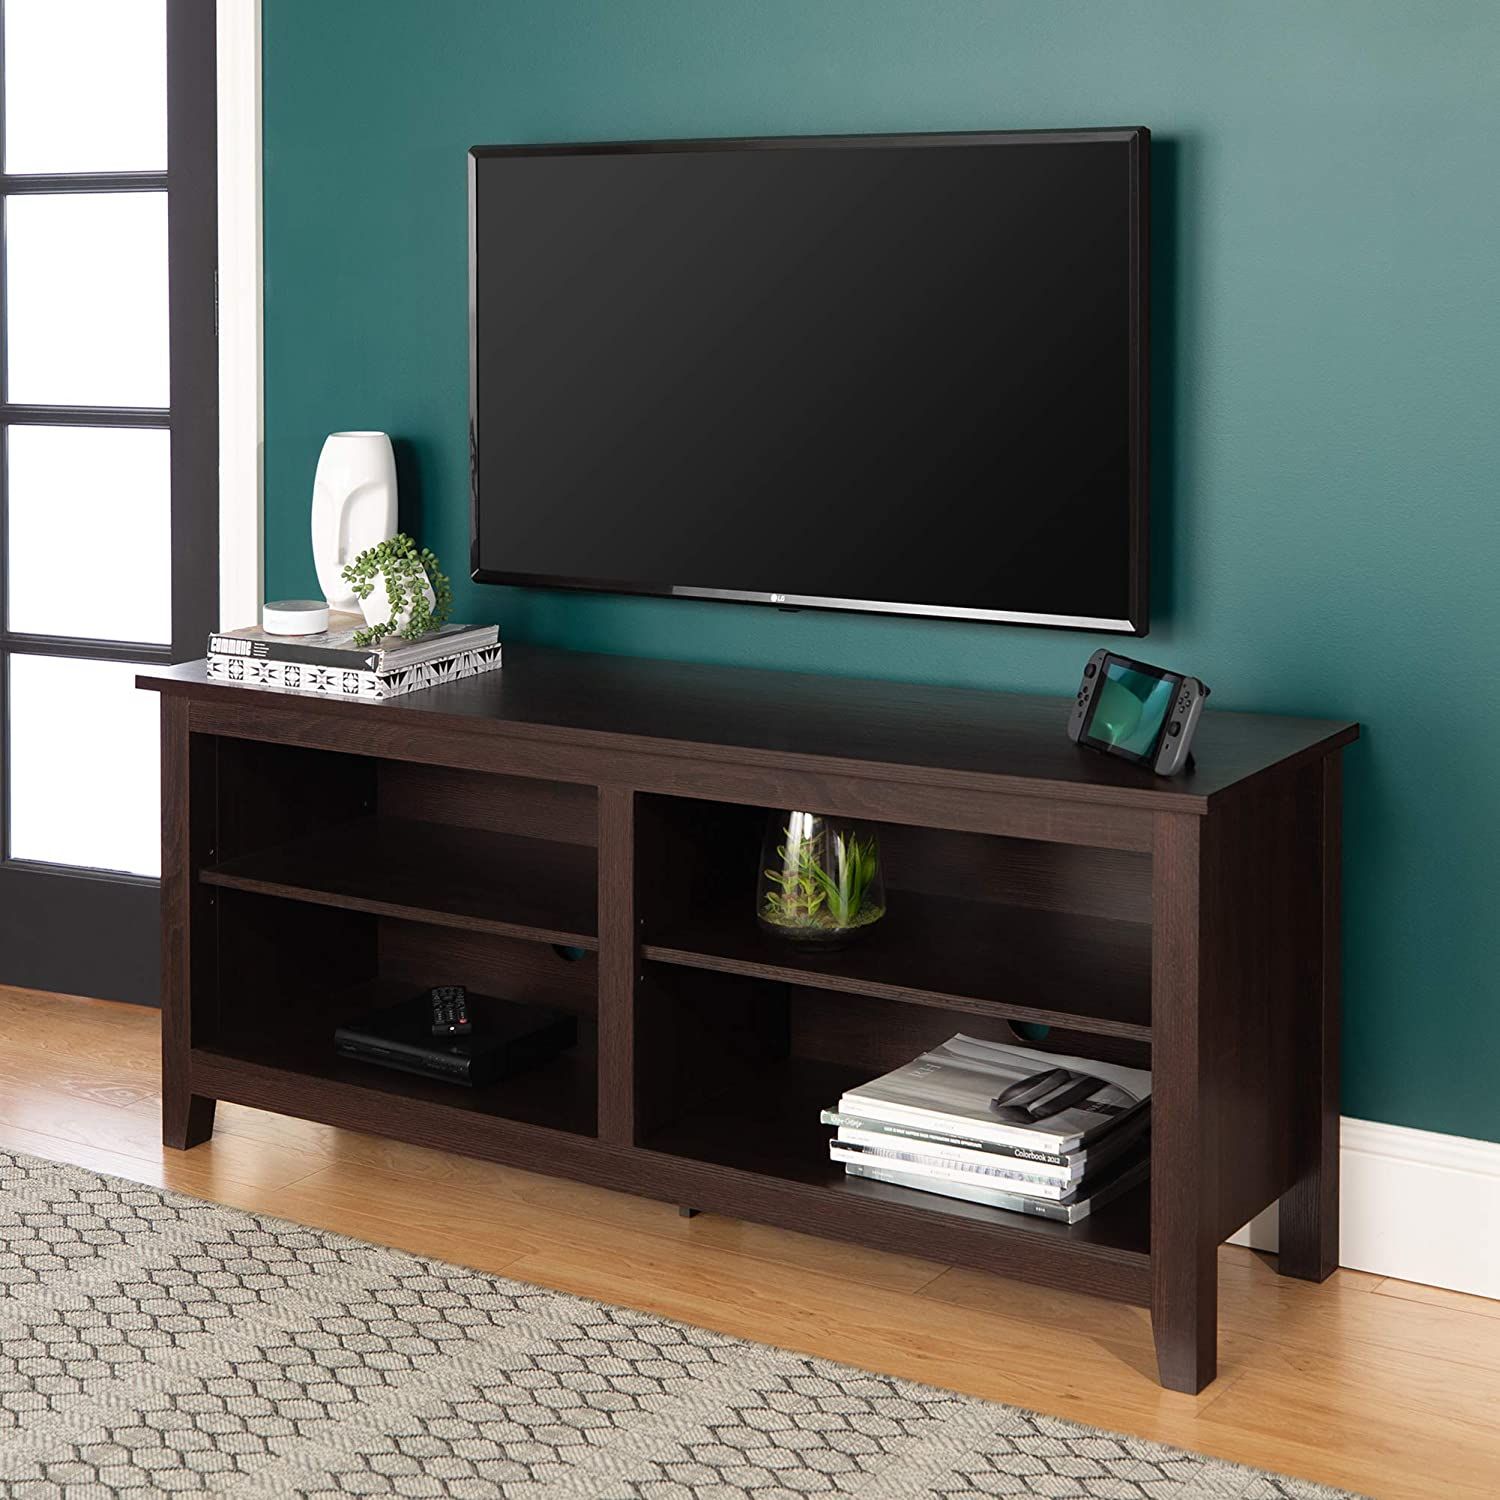 Sekey Home Entertainment Center Wood Media Tv Stand, 58 Inch With Labarbera Tv Stands For Tvs Up To 58" (View 3 of 15)